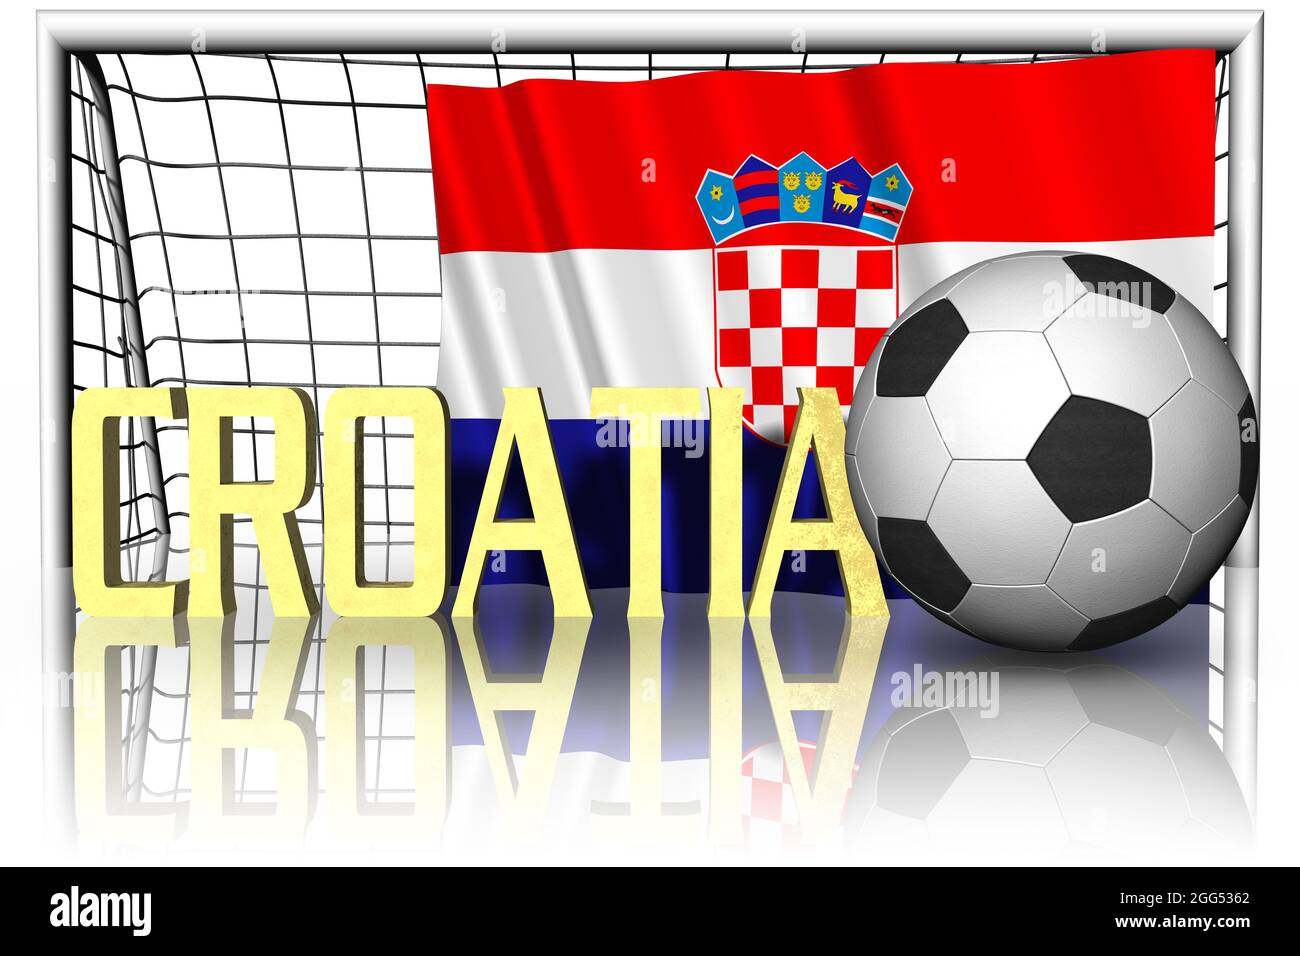 Croatia. National flag with soccer ball in the foreground. Sport football - 3D Illustration Stock Photo